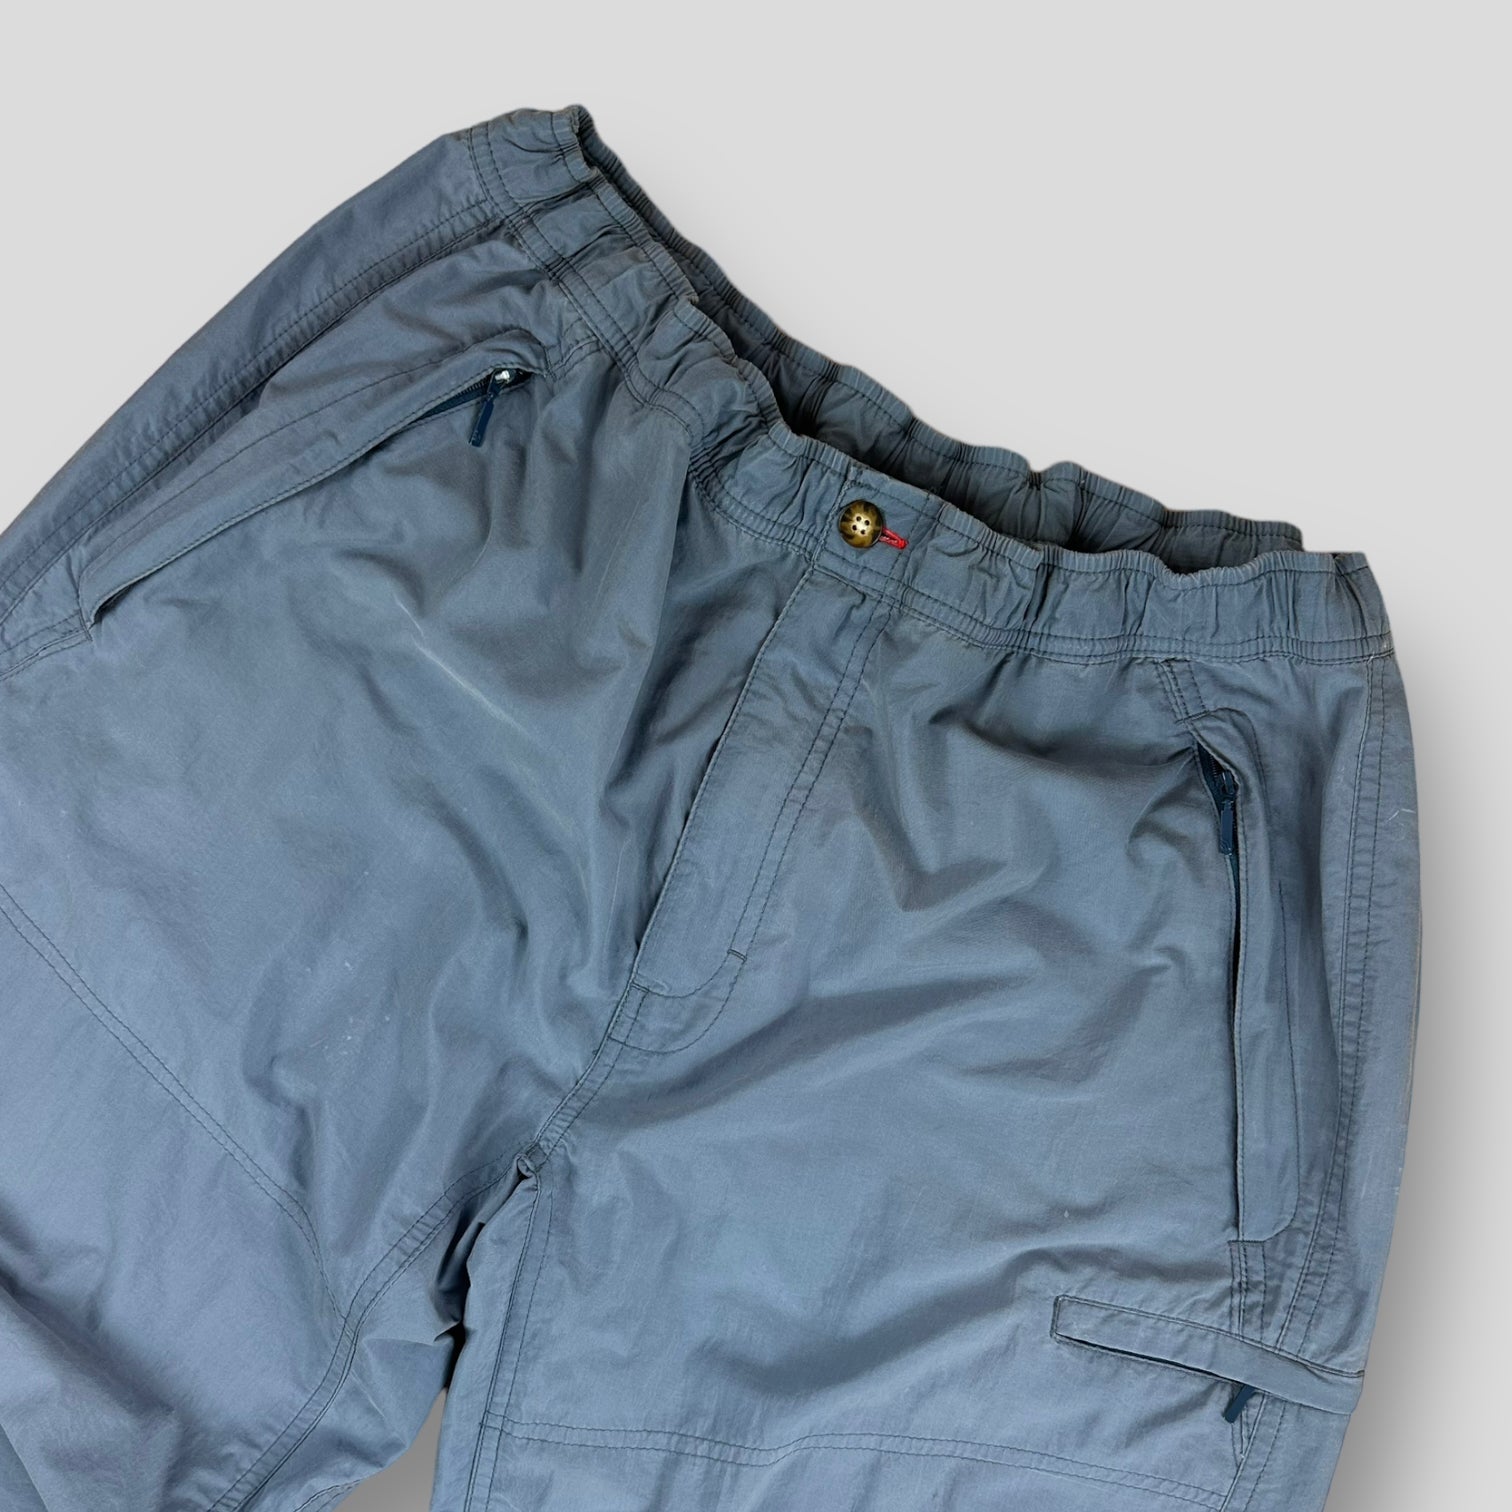 North face trouser